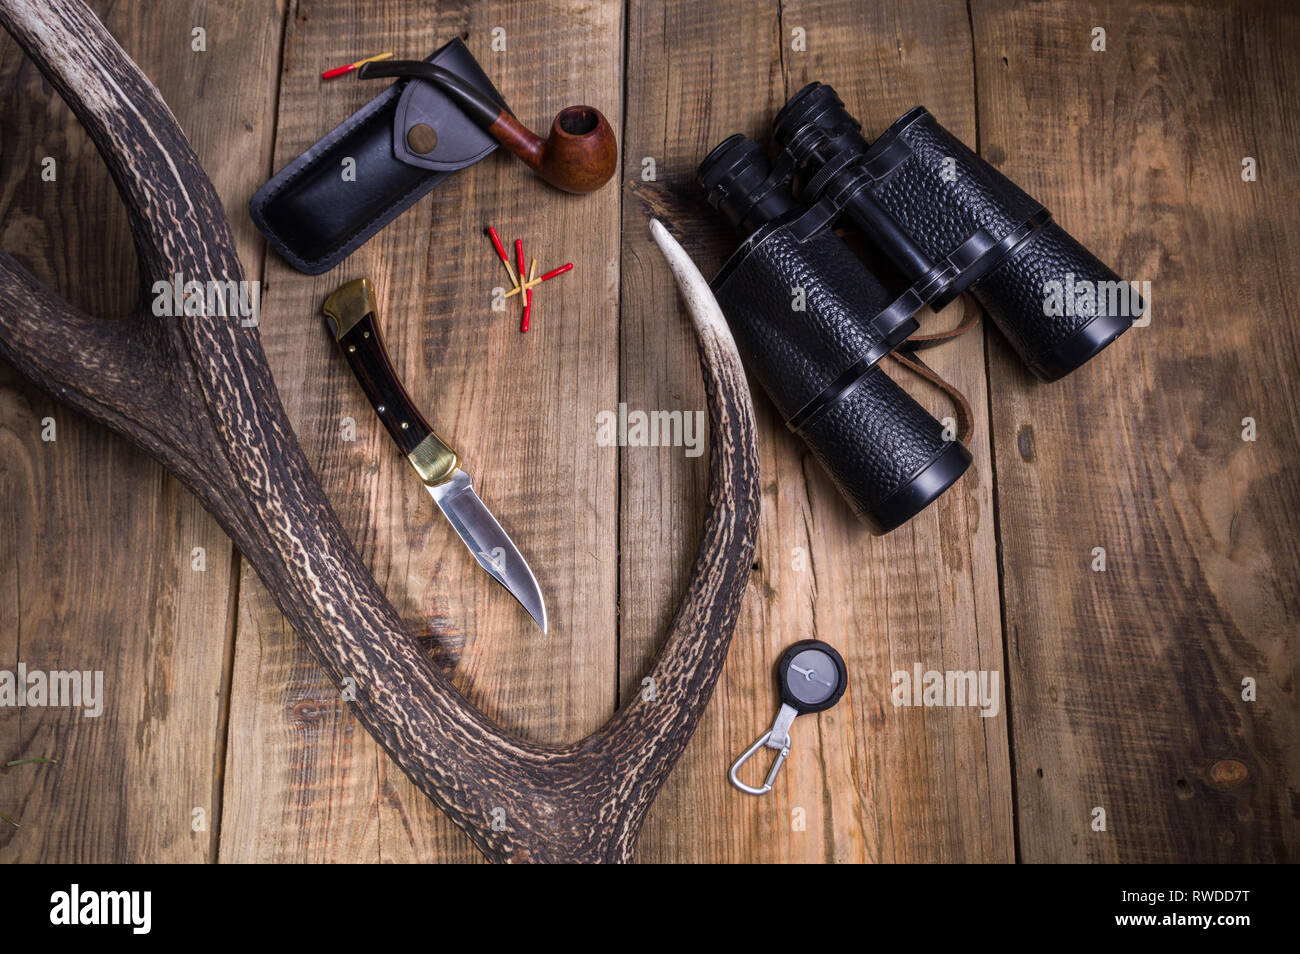 A hunting knife, binoculars and a cradle for tobacco. Deer horn and tree in the background. Top. Stock Photo